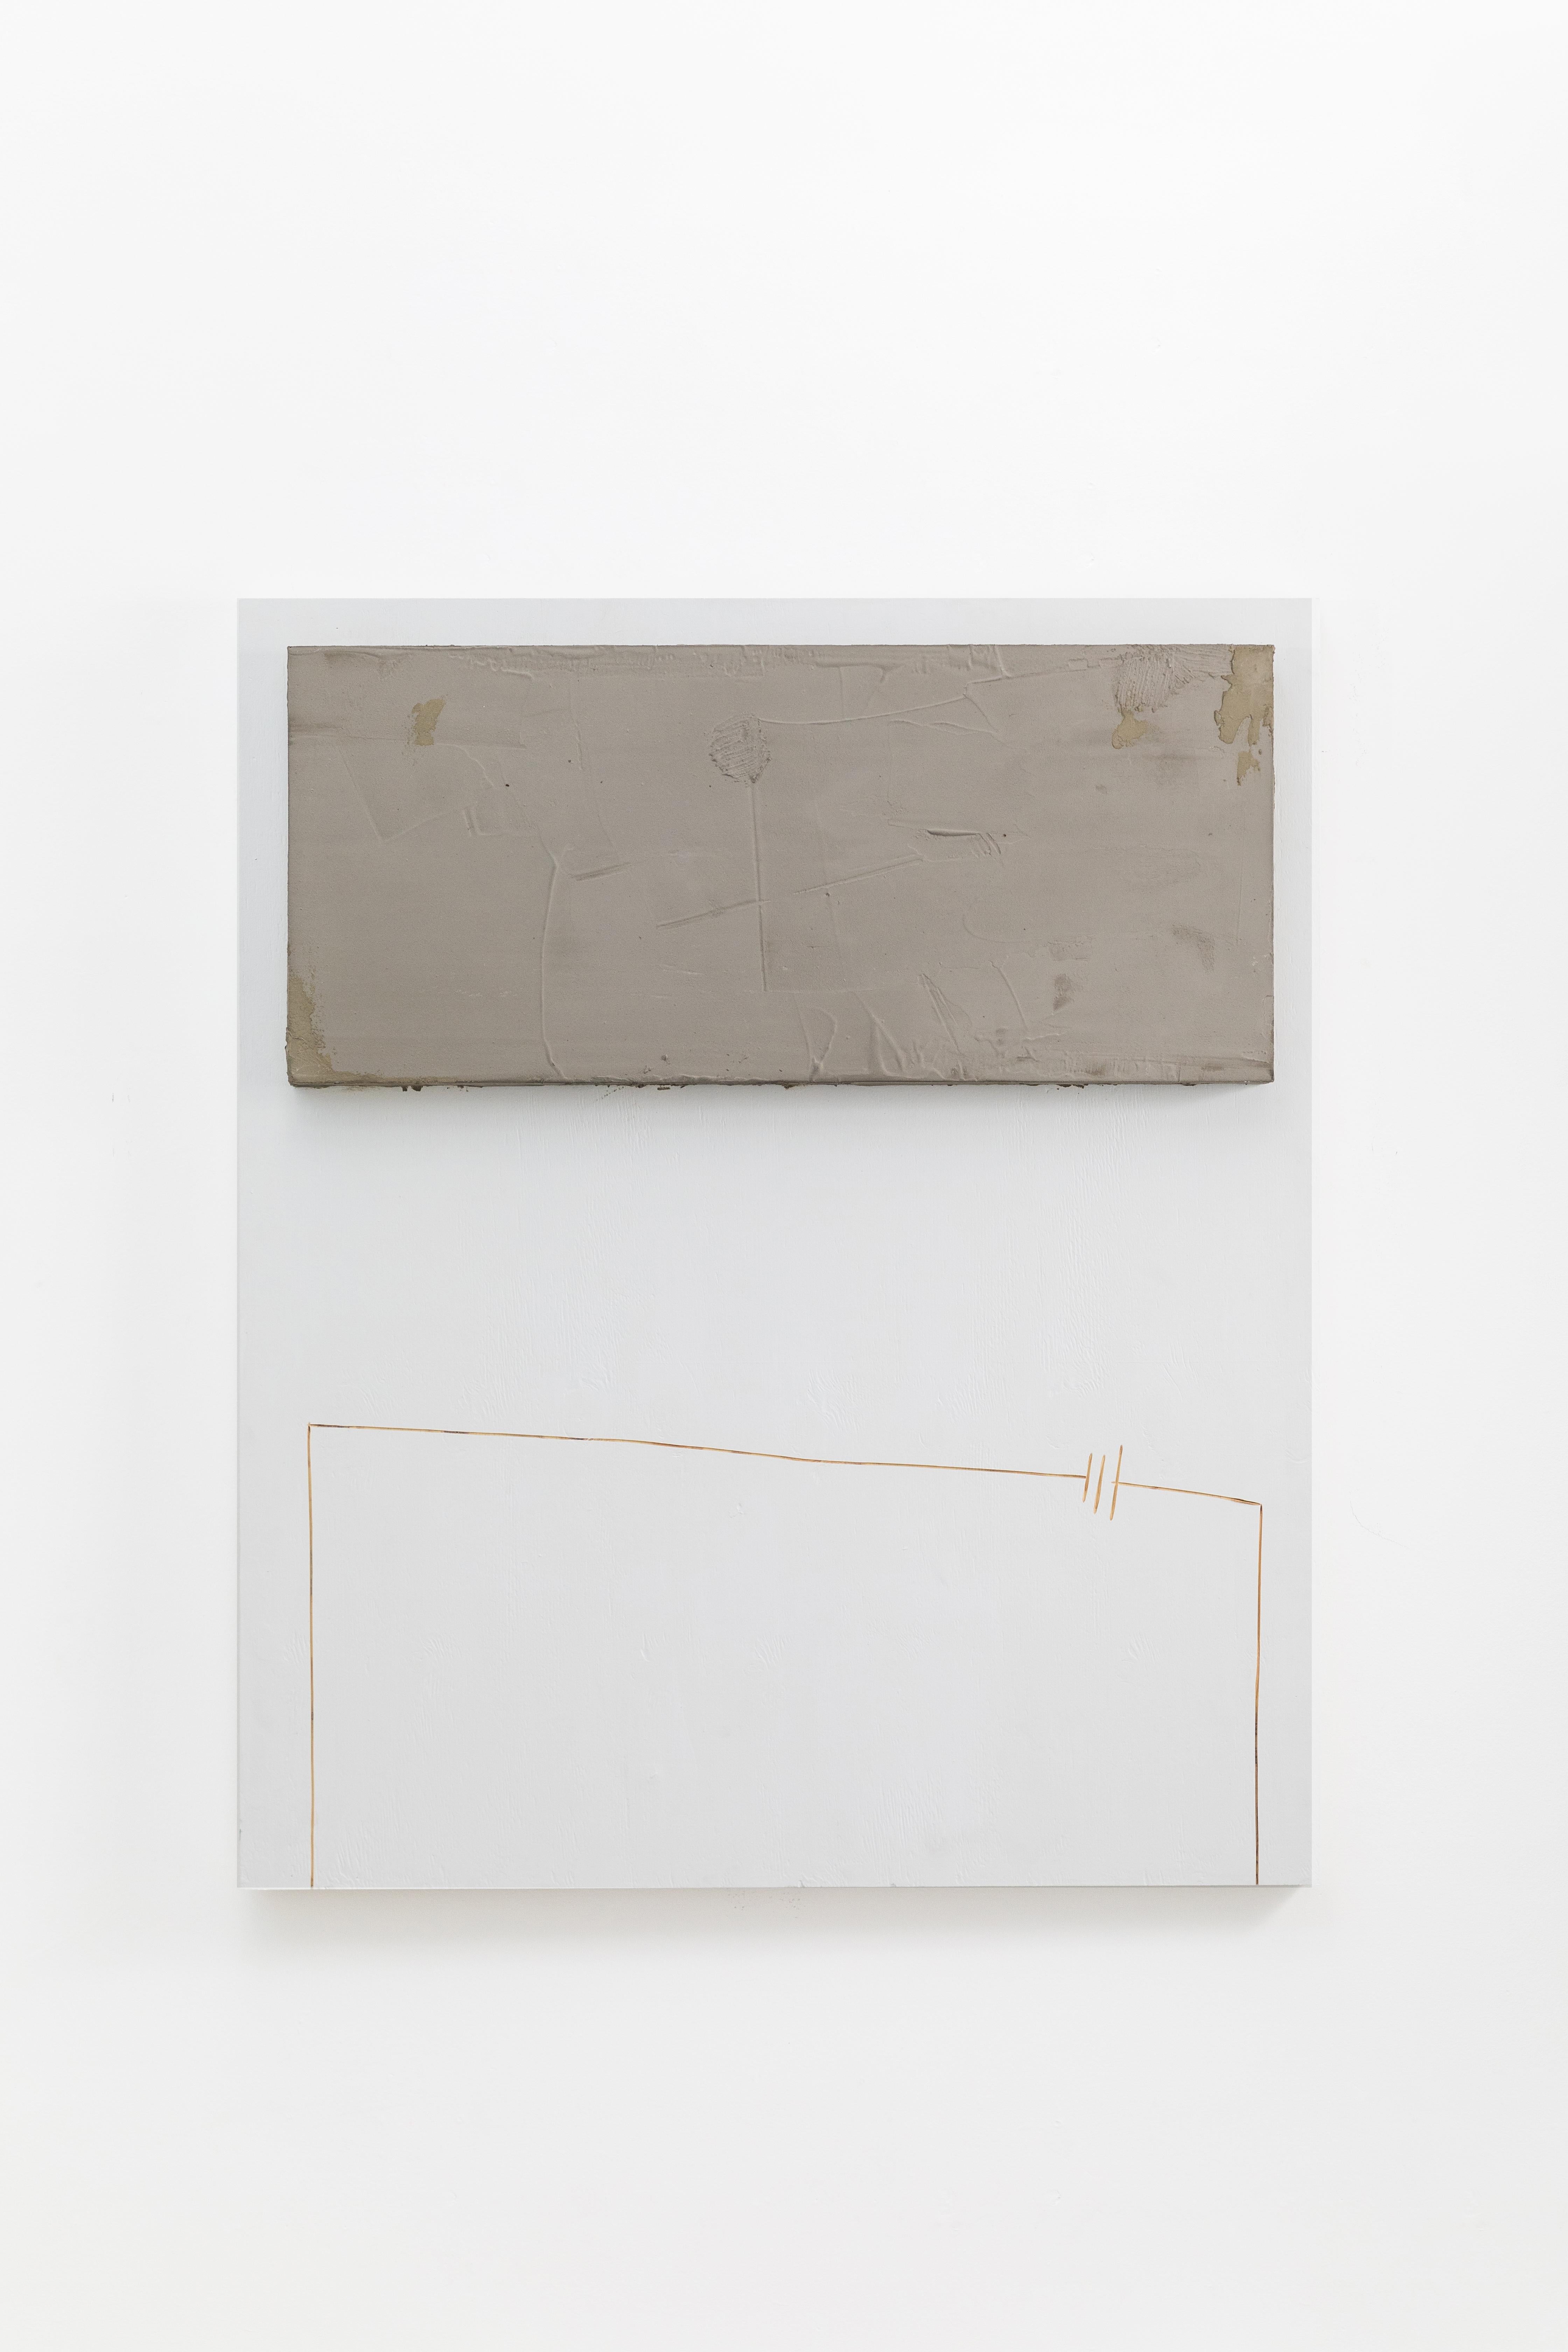 Rurak’s Portland White paintings have a minimalist confidence. Simple white boards are impulsively etched with groups of lines and forms familiar in his lexicon of imagery. The etching, which also appears in his Steel Paintings and much of his